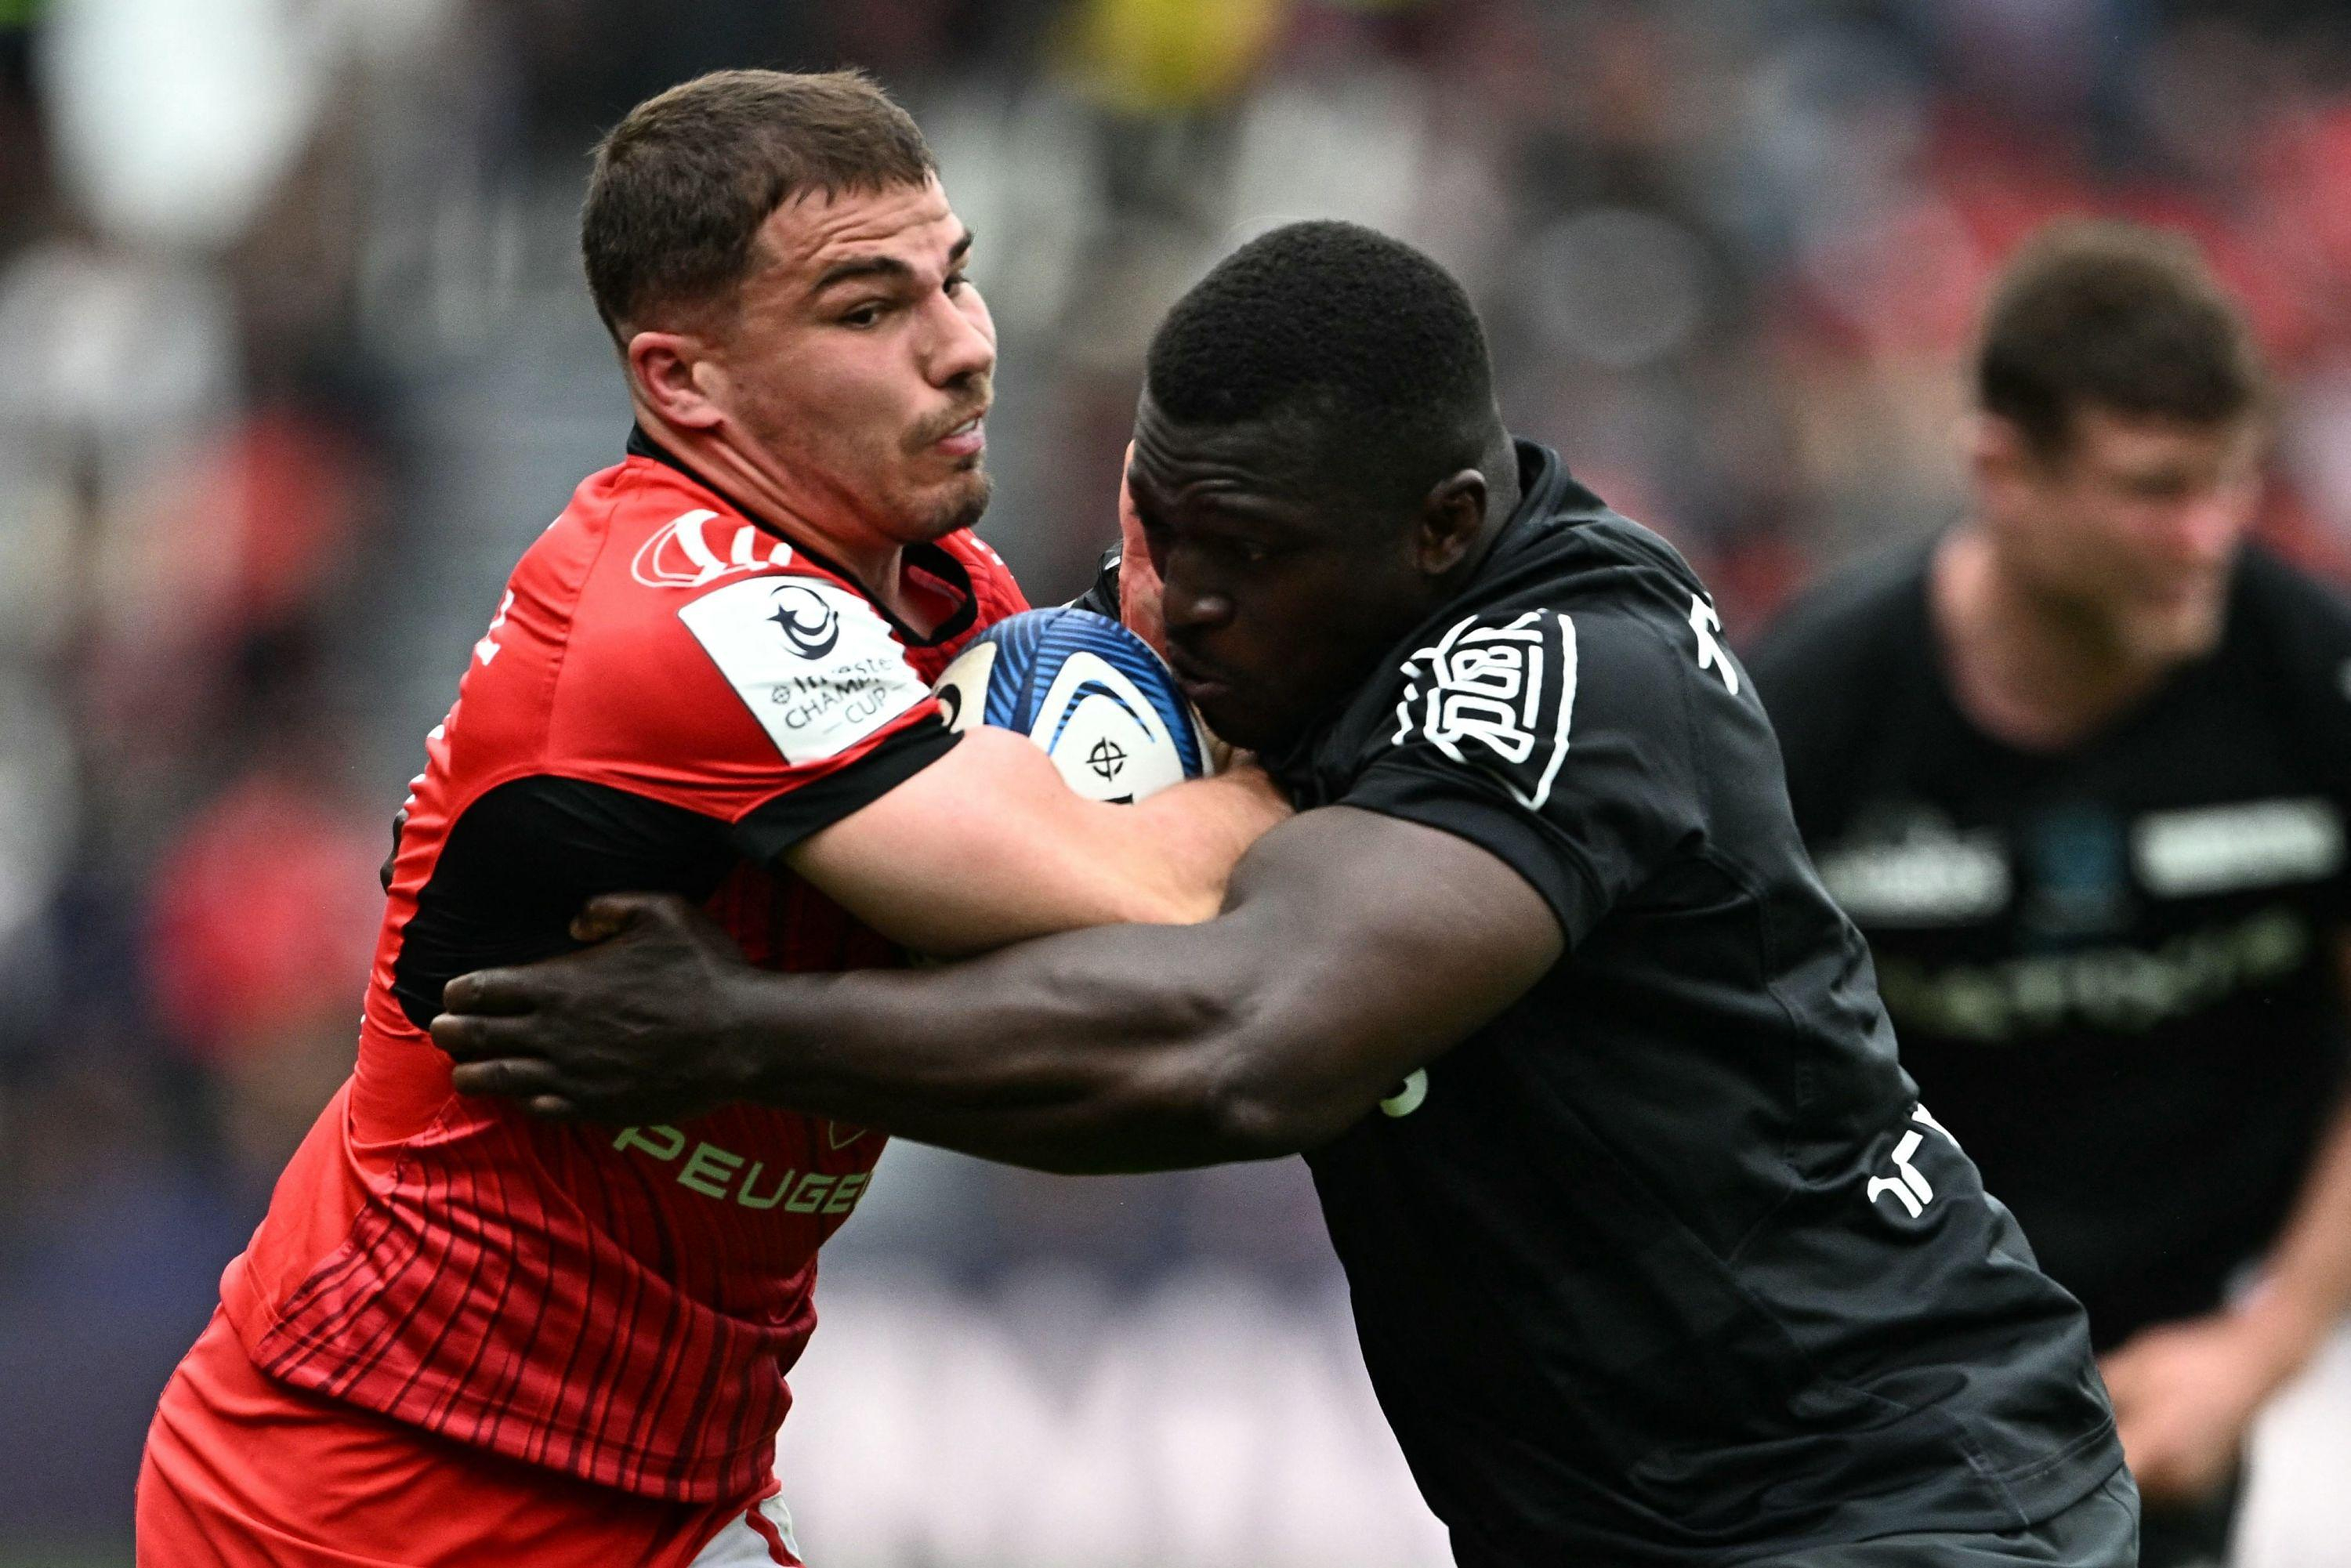 Champions Cup: Romain Ntamack “gave a very complete, very solid performance”, appreciates Dupont